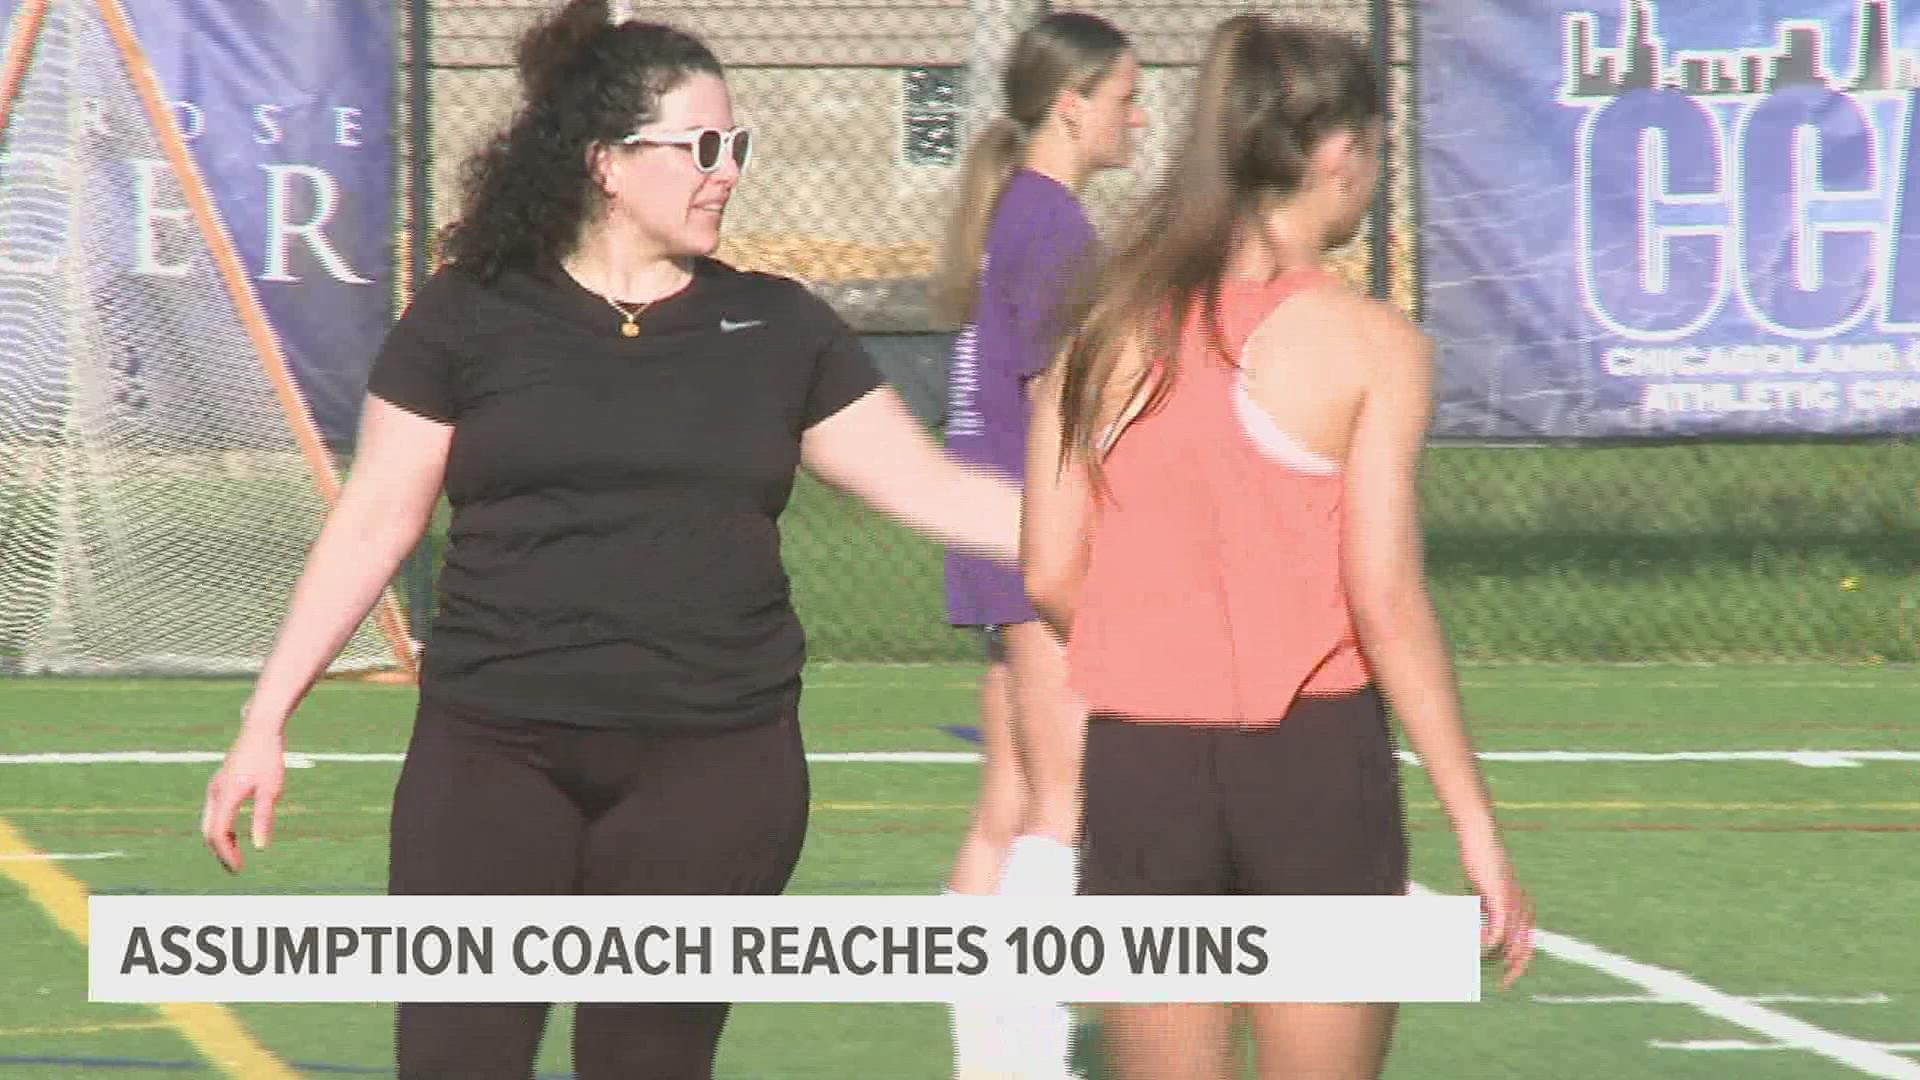 Elizabeth Maus has reached her 100th win as head coach of Assumption Girl's Soccer - a feat made more impressive by her 6-year tenure so far.